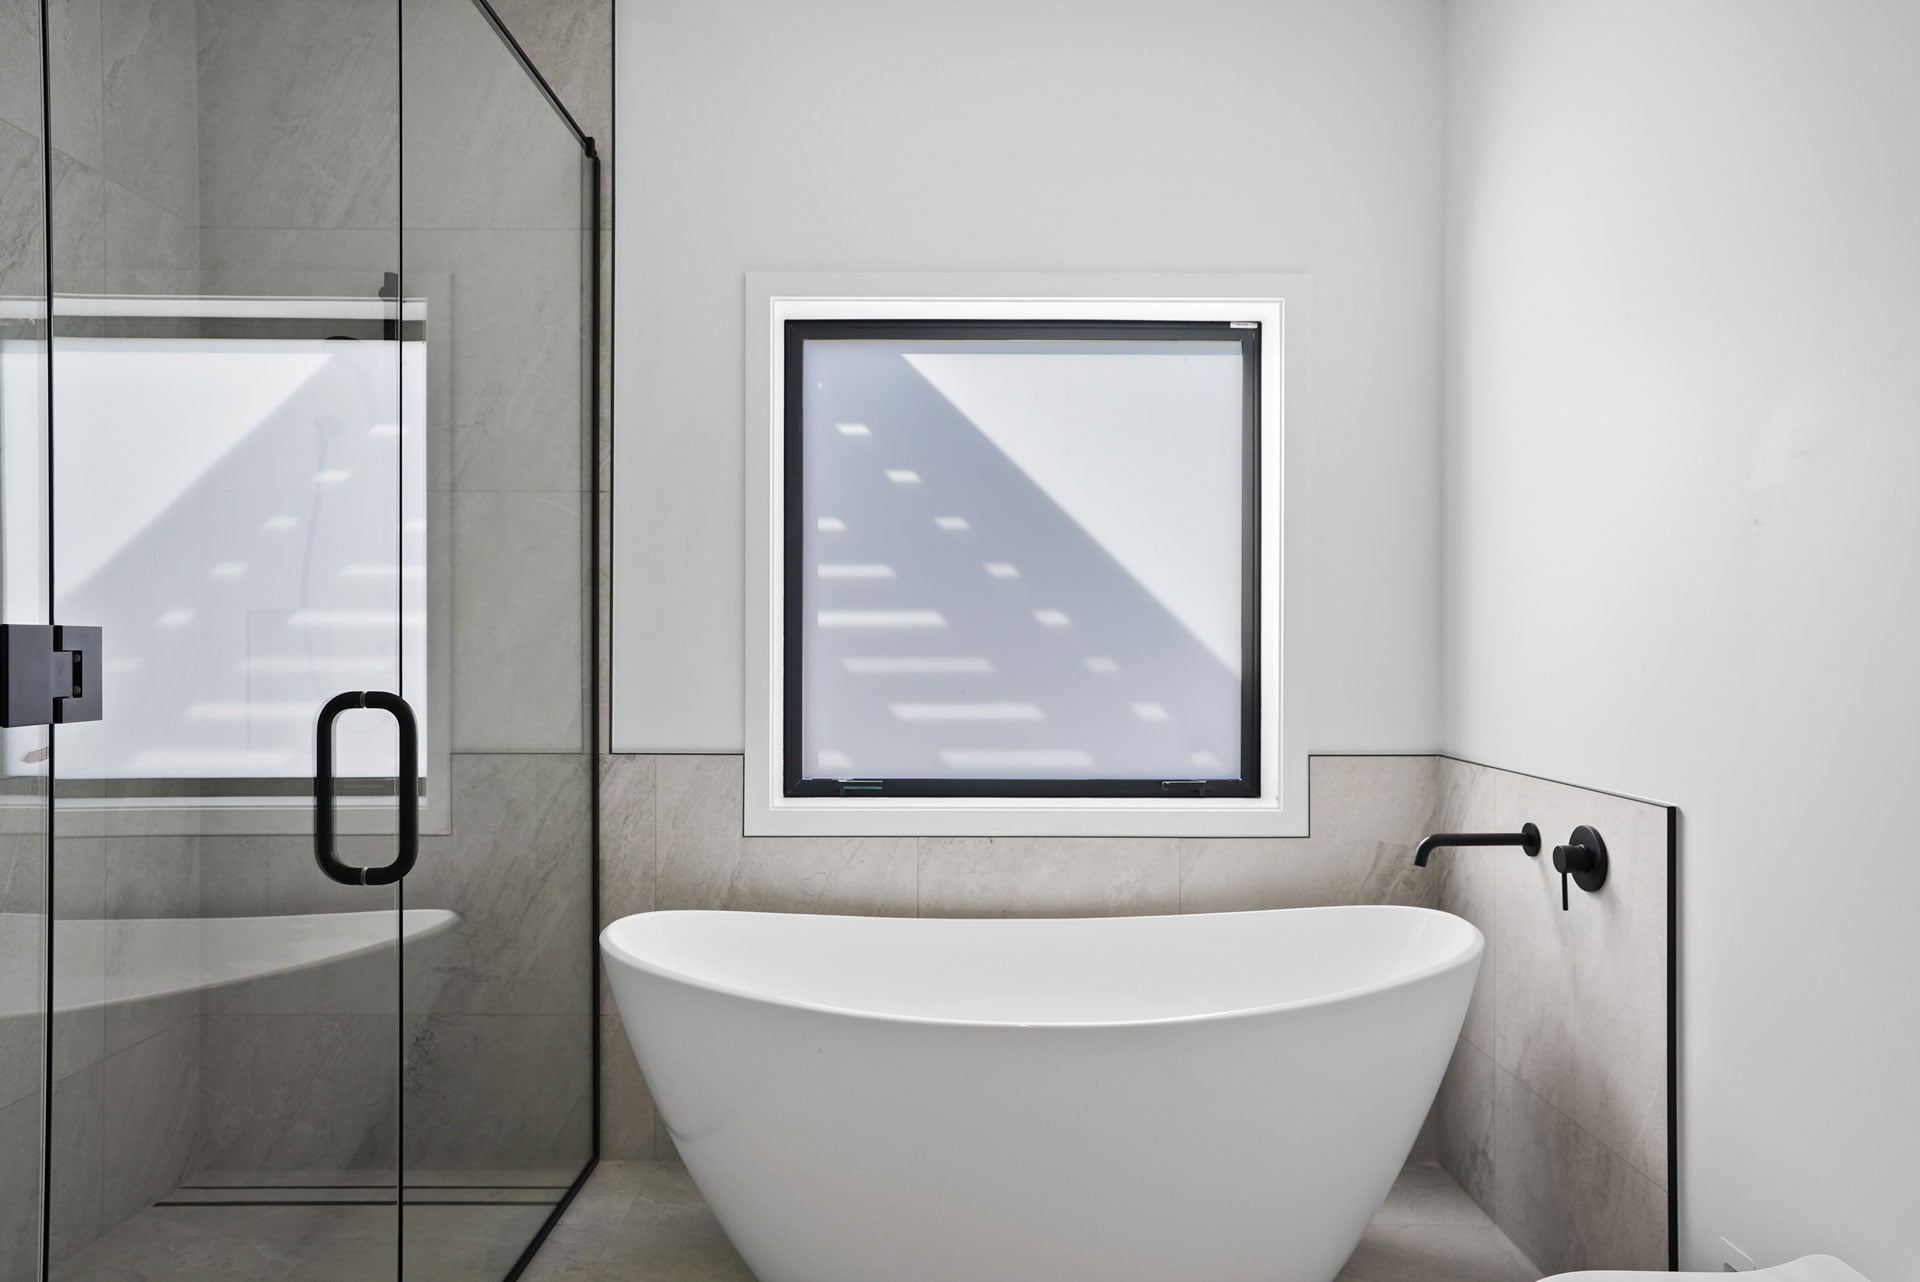 Modern tiled floor and wall tiles in a black and white contrasting bathroom scene